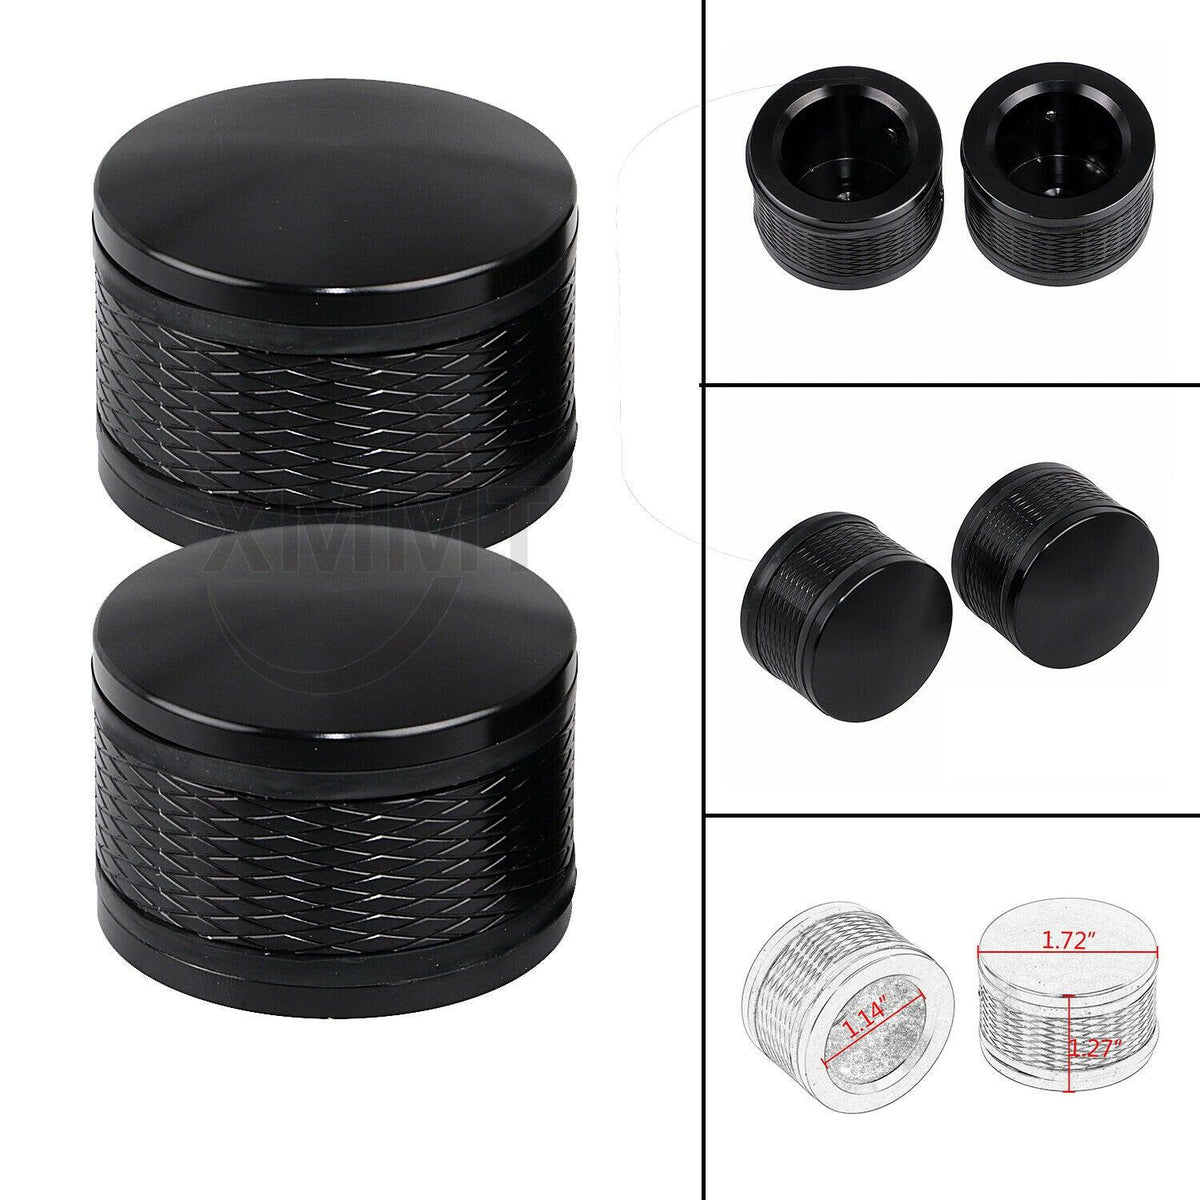 Bayda Black Front Axle Nut Cover Cap for Softail Sportster Dyna Road King Vrod King